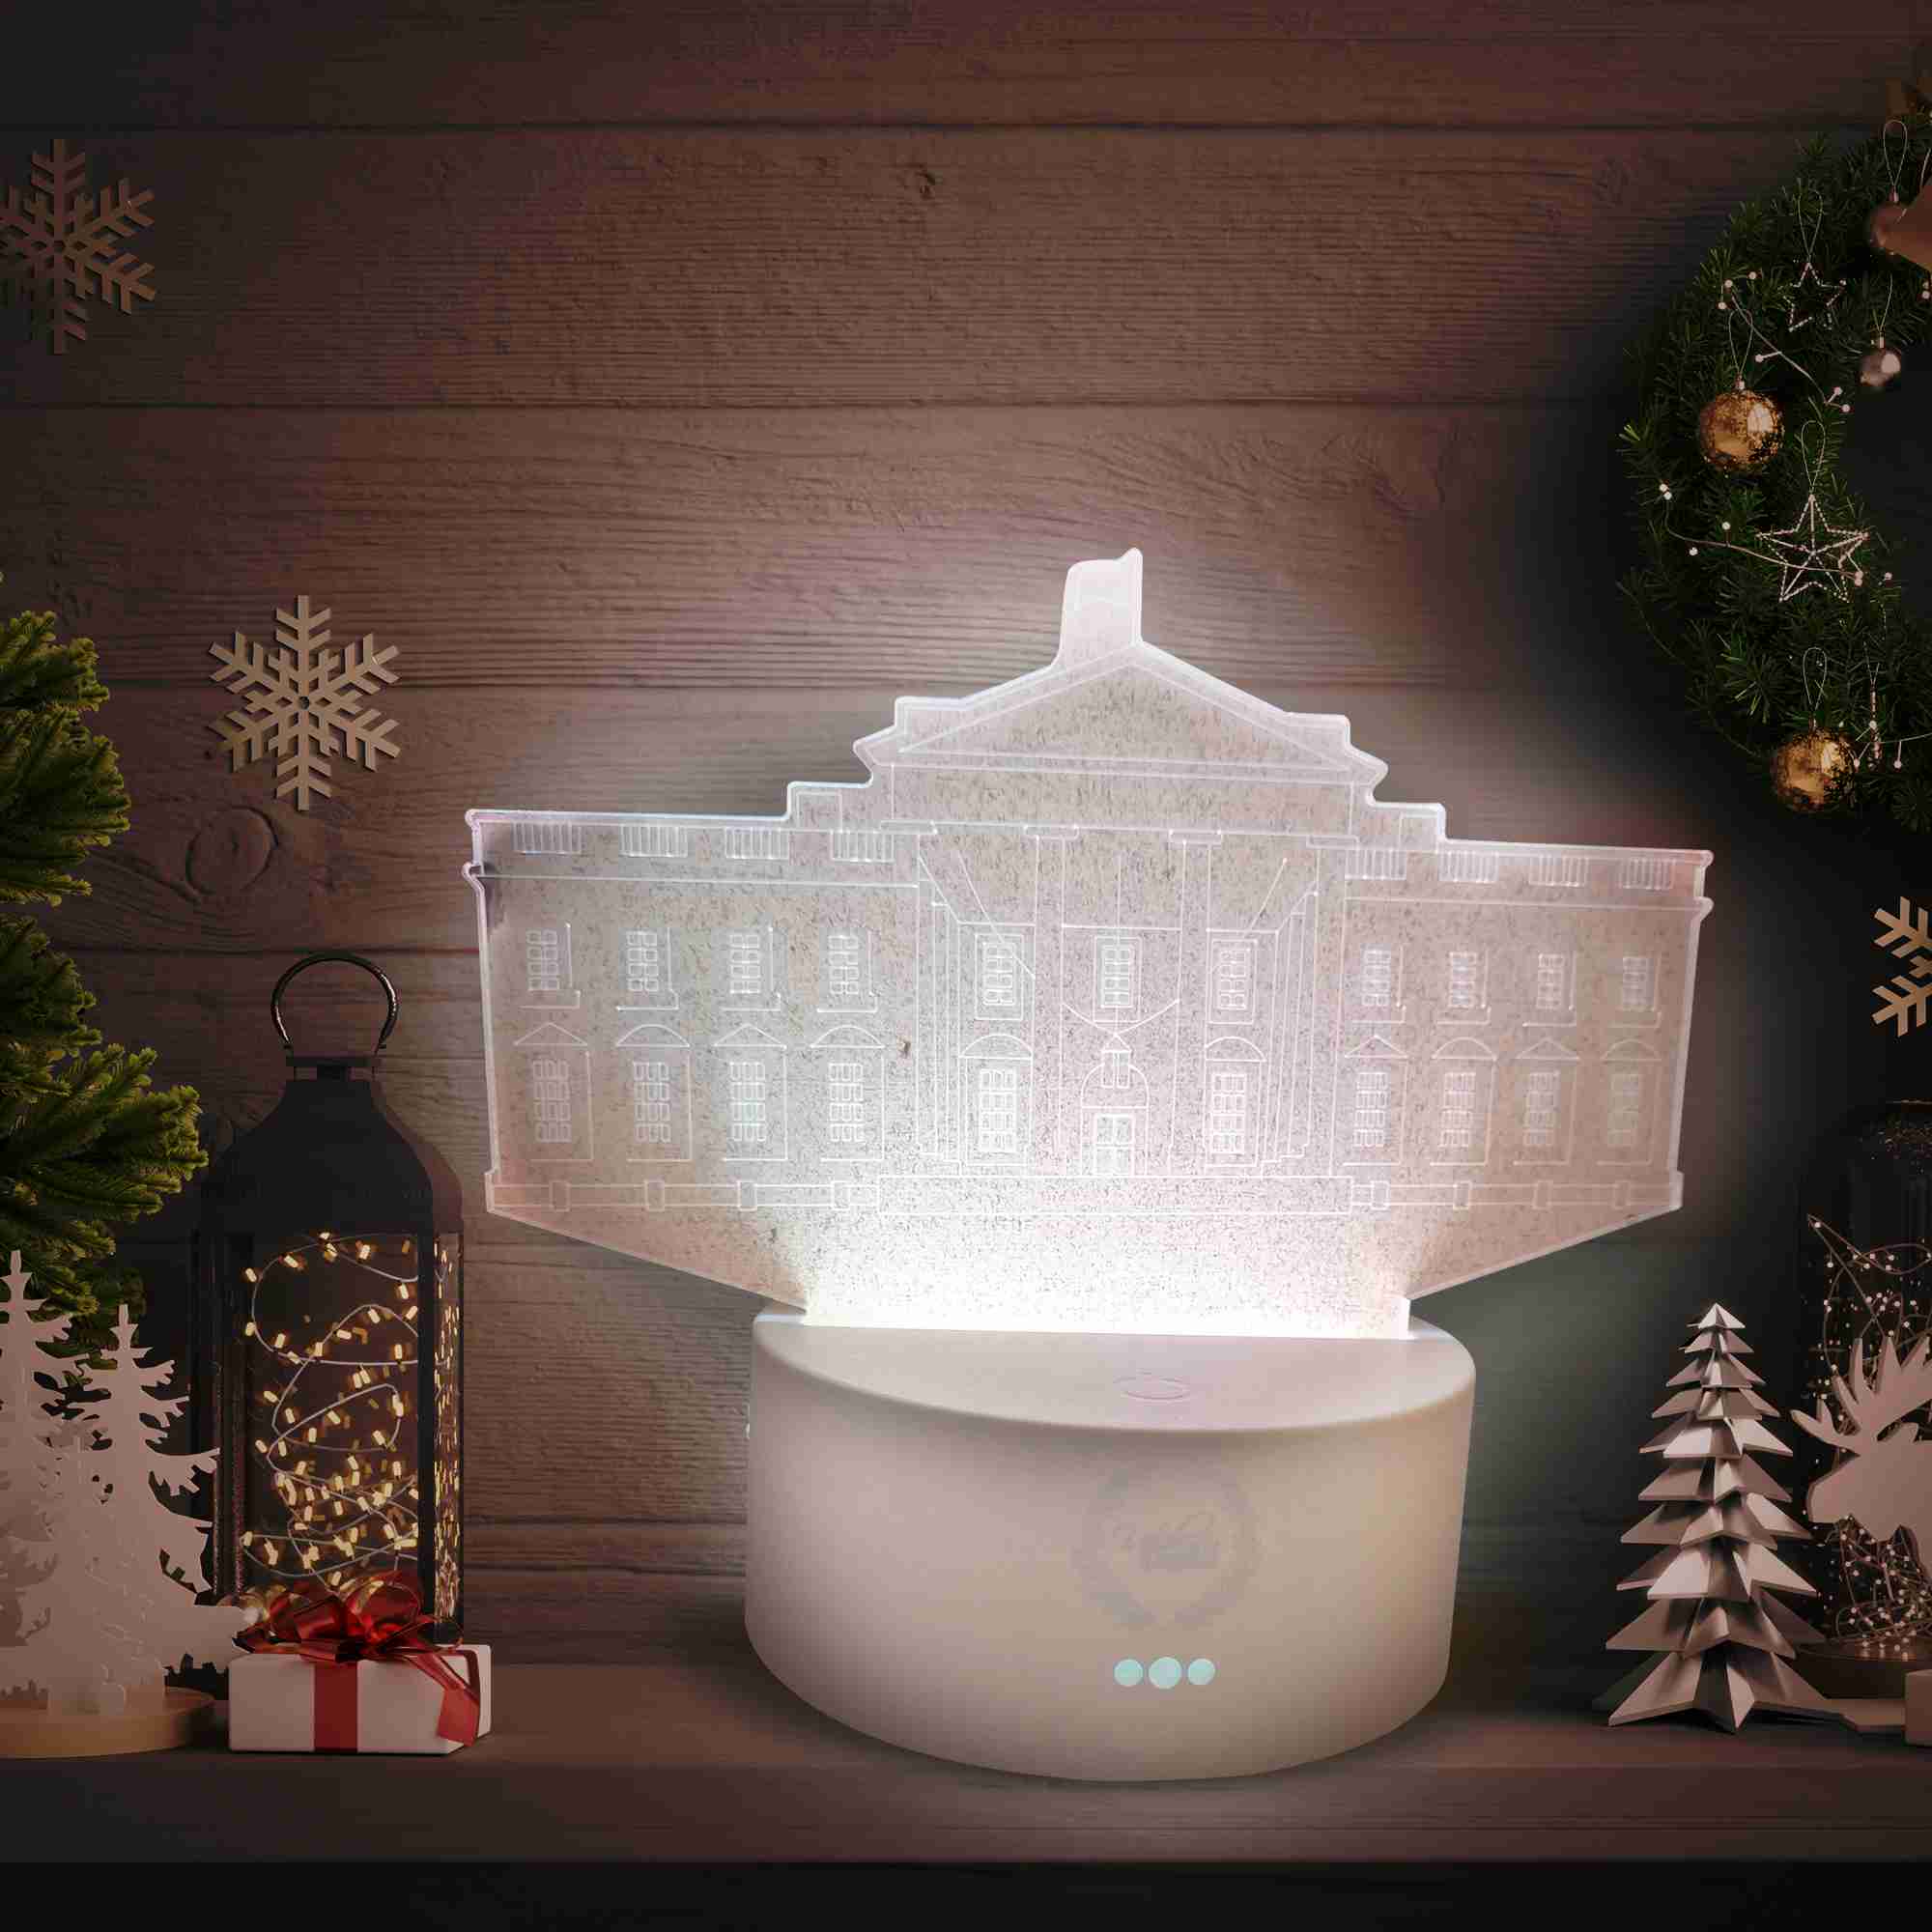 night-light-illusion-white-house-presidential-lights-kids-la with discount code